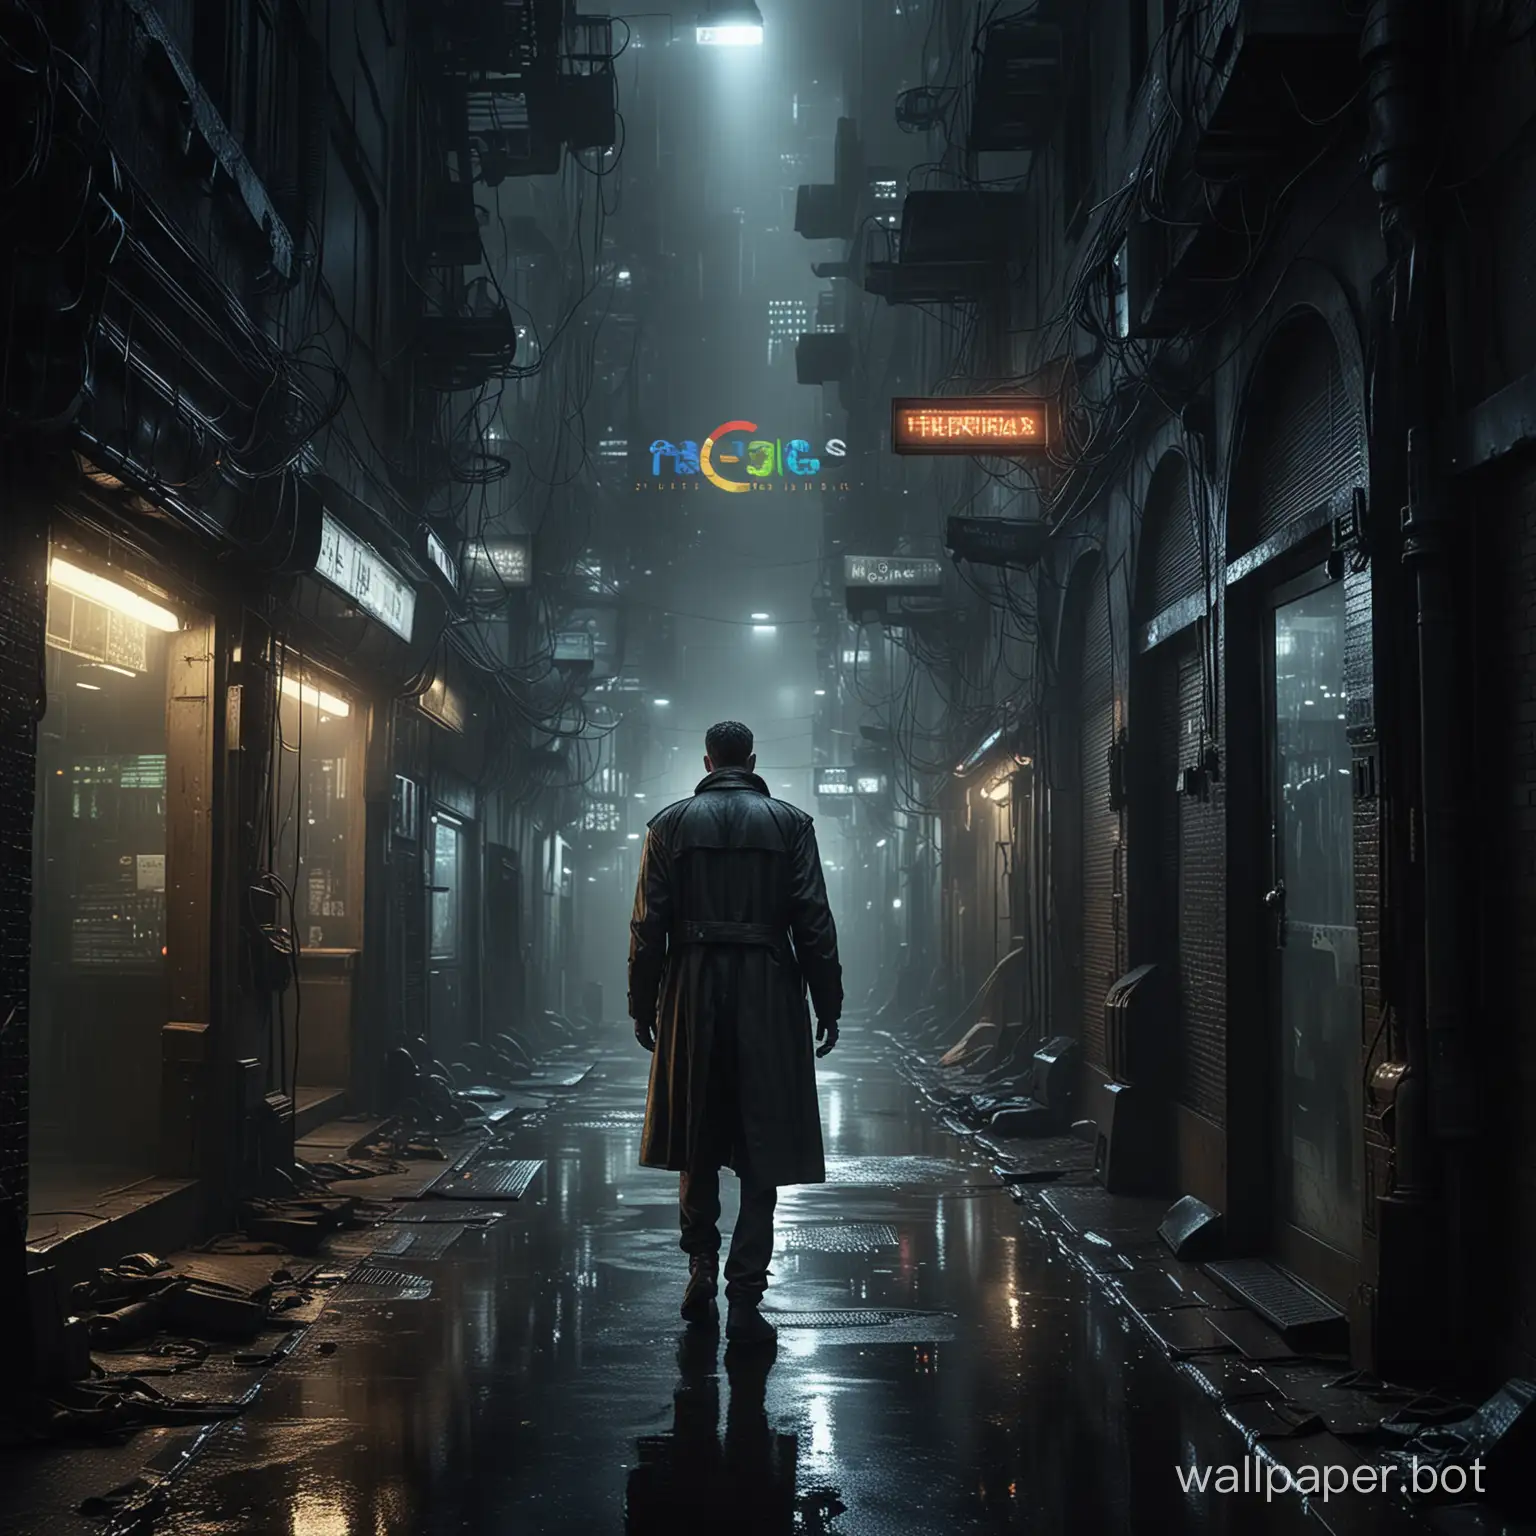 A spy hidden in the dark 40 meters away, in a blade runner style, with an image of Google company far away and spotlights far away. 
The surroundings are opened